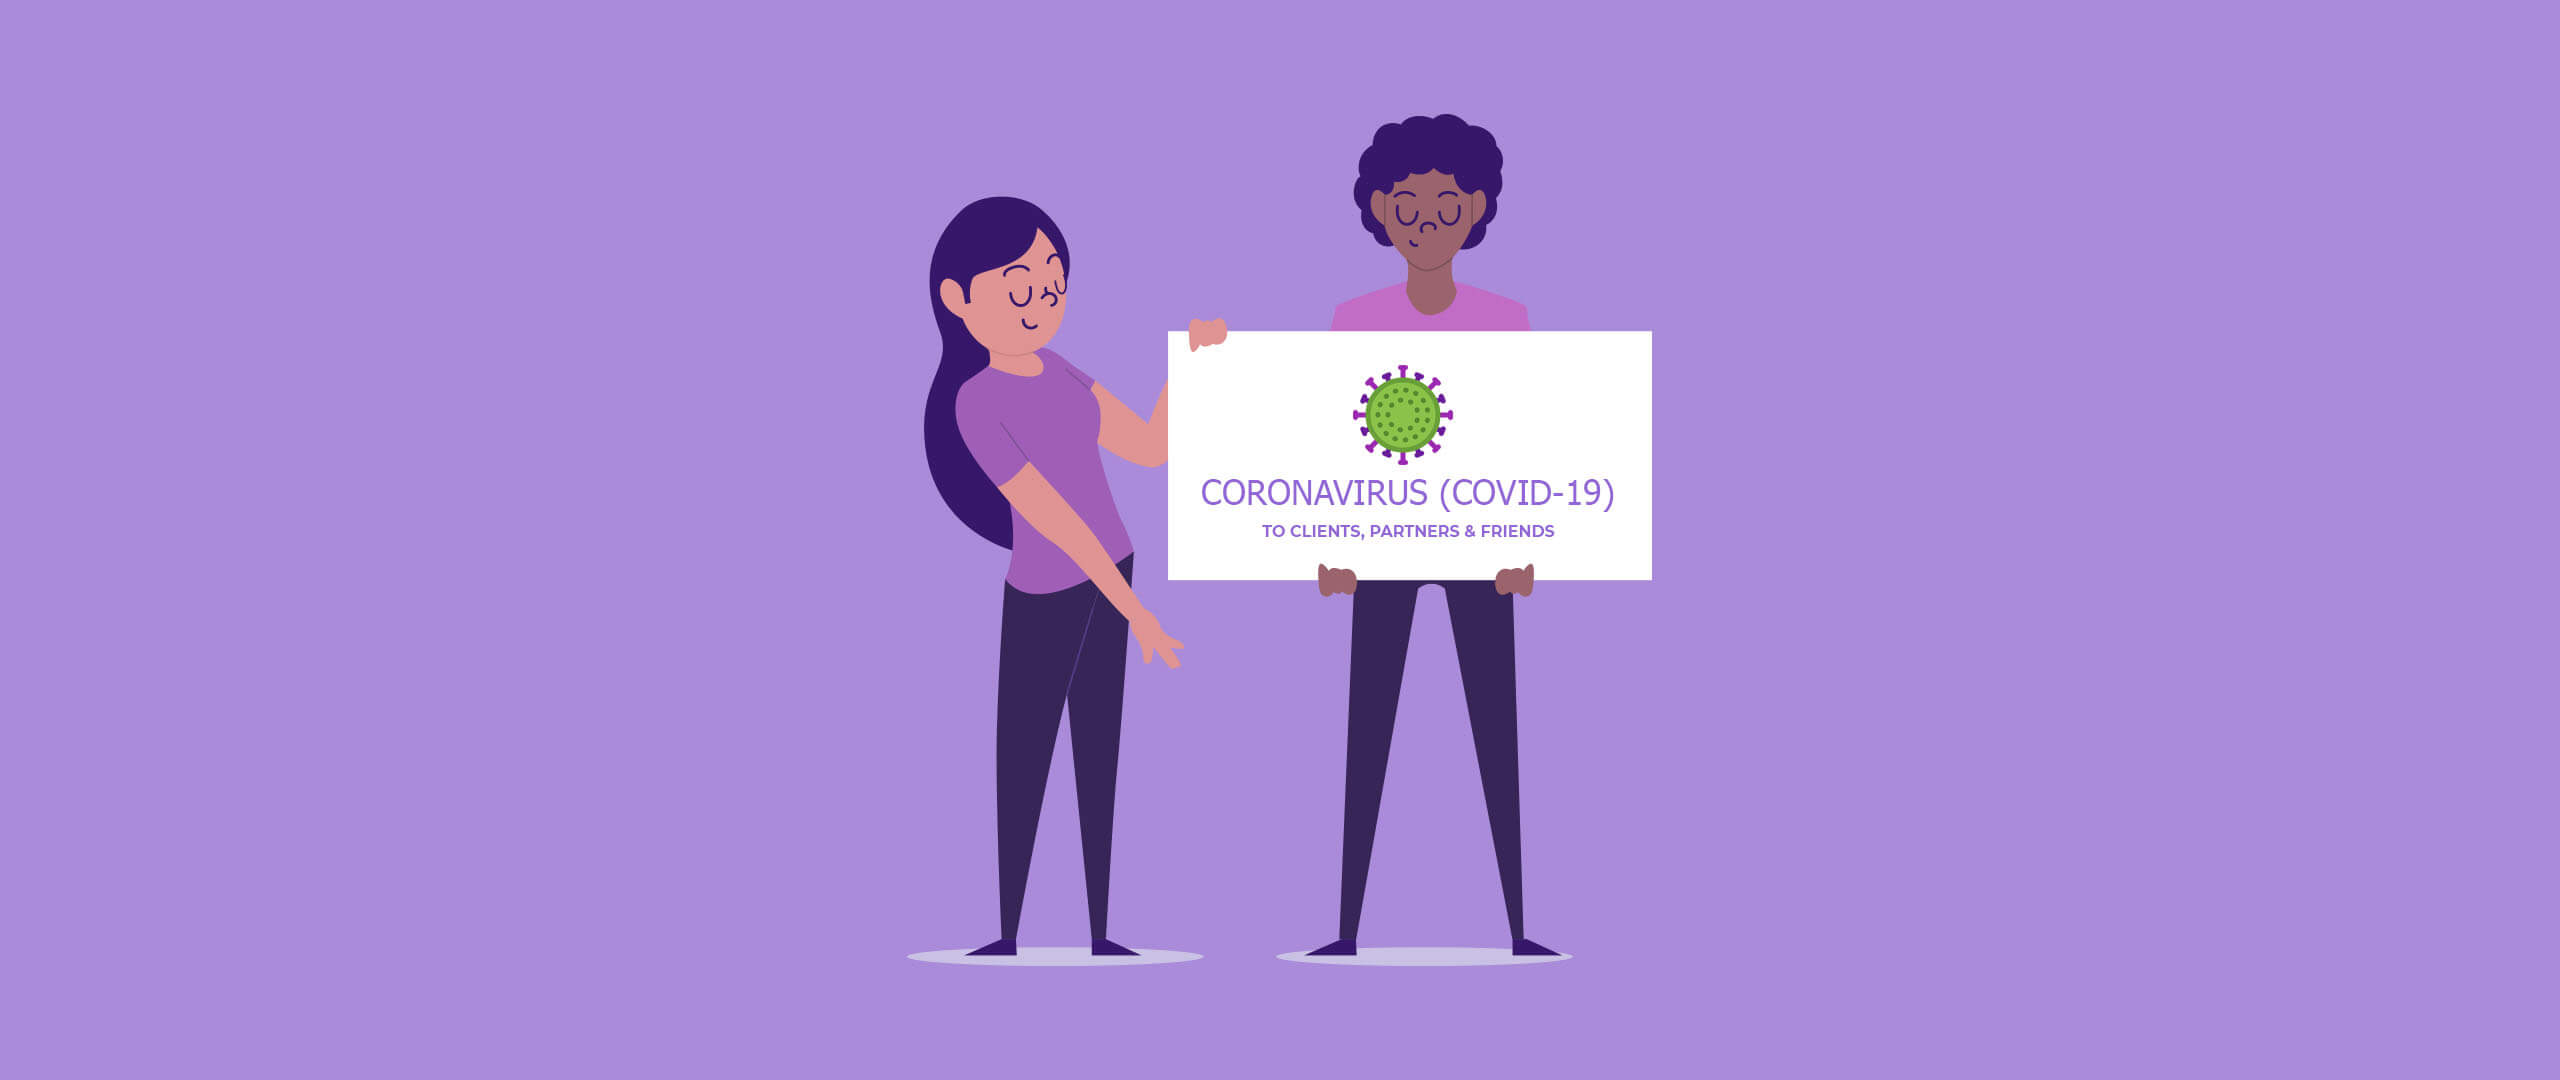 Serving Our Clients During the Coronavirus (COVID-19) Pandemic